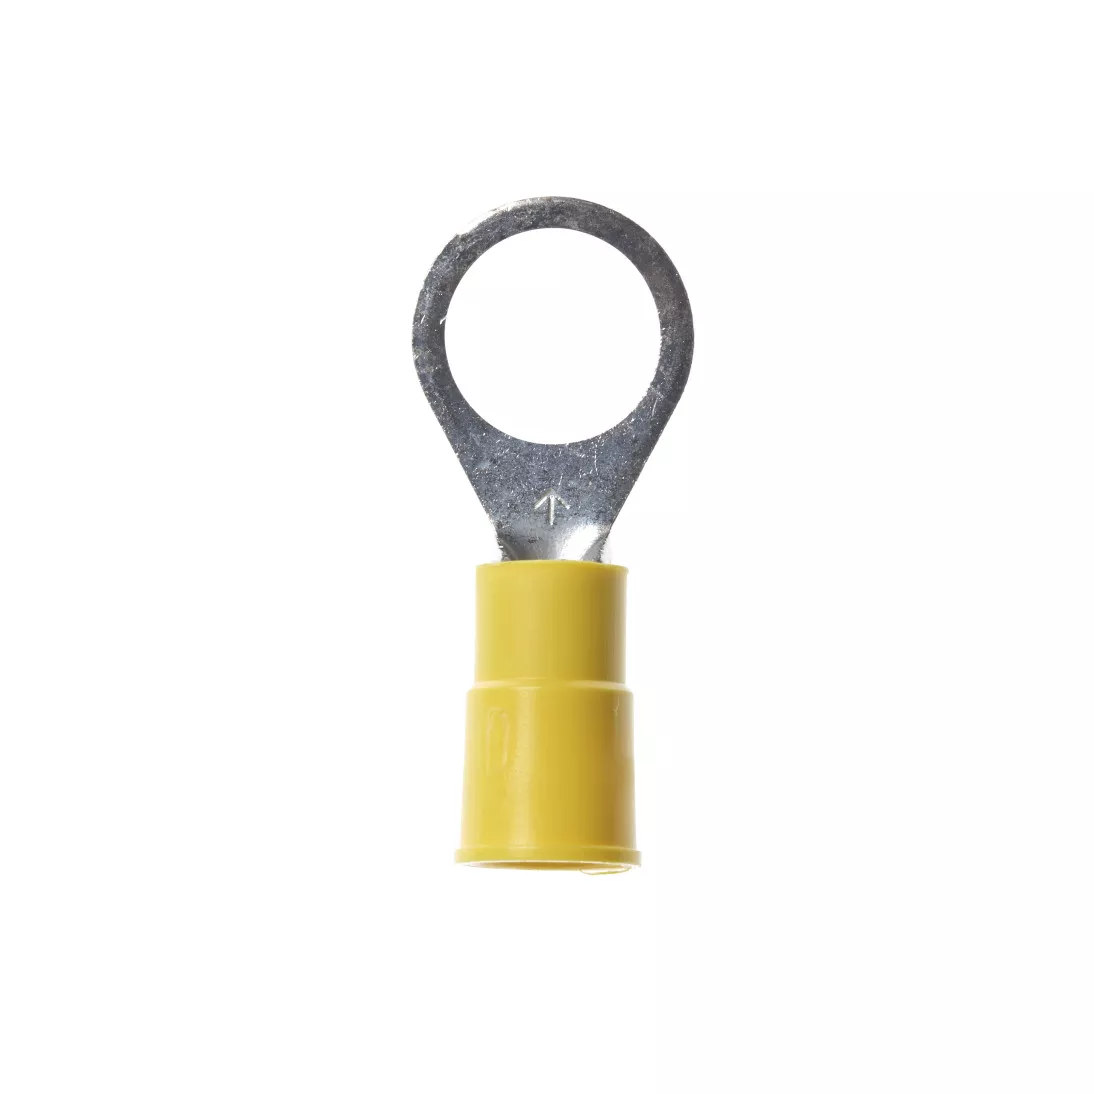 3M™ Scotchlok™ Ring Vinyl Insulated, 50/bottle, MVU10-38R/SX,
standard-style ring tongue fits around the stud, 500/Case